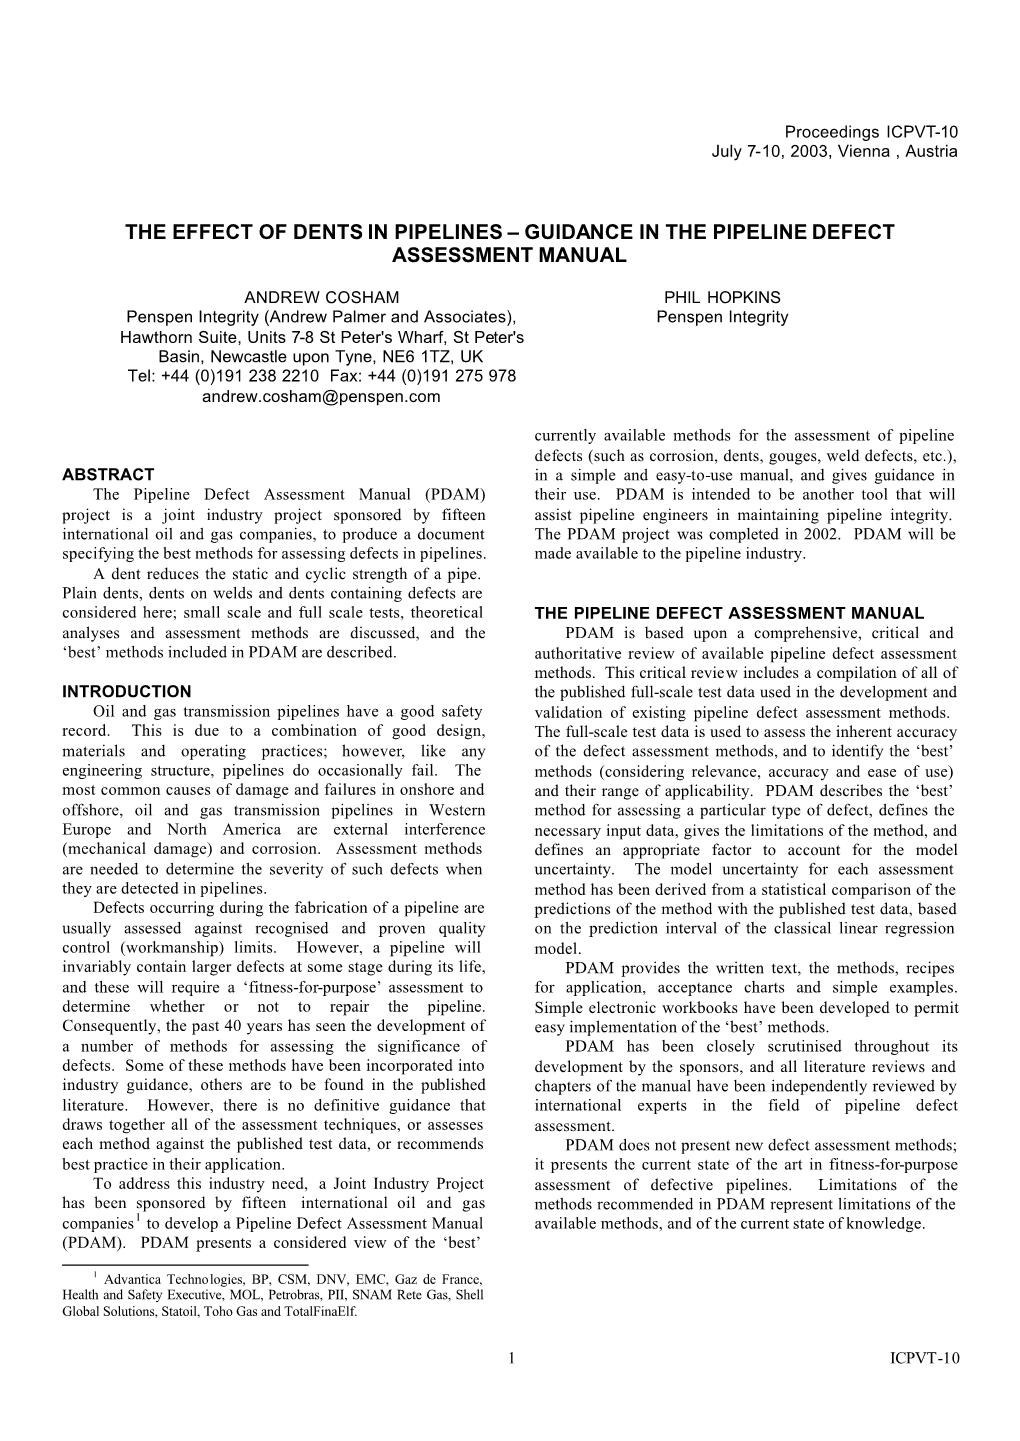 The Effect of Dents in Pipelines – Guidance in the Pipeline Defect Assessment Manual